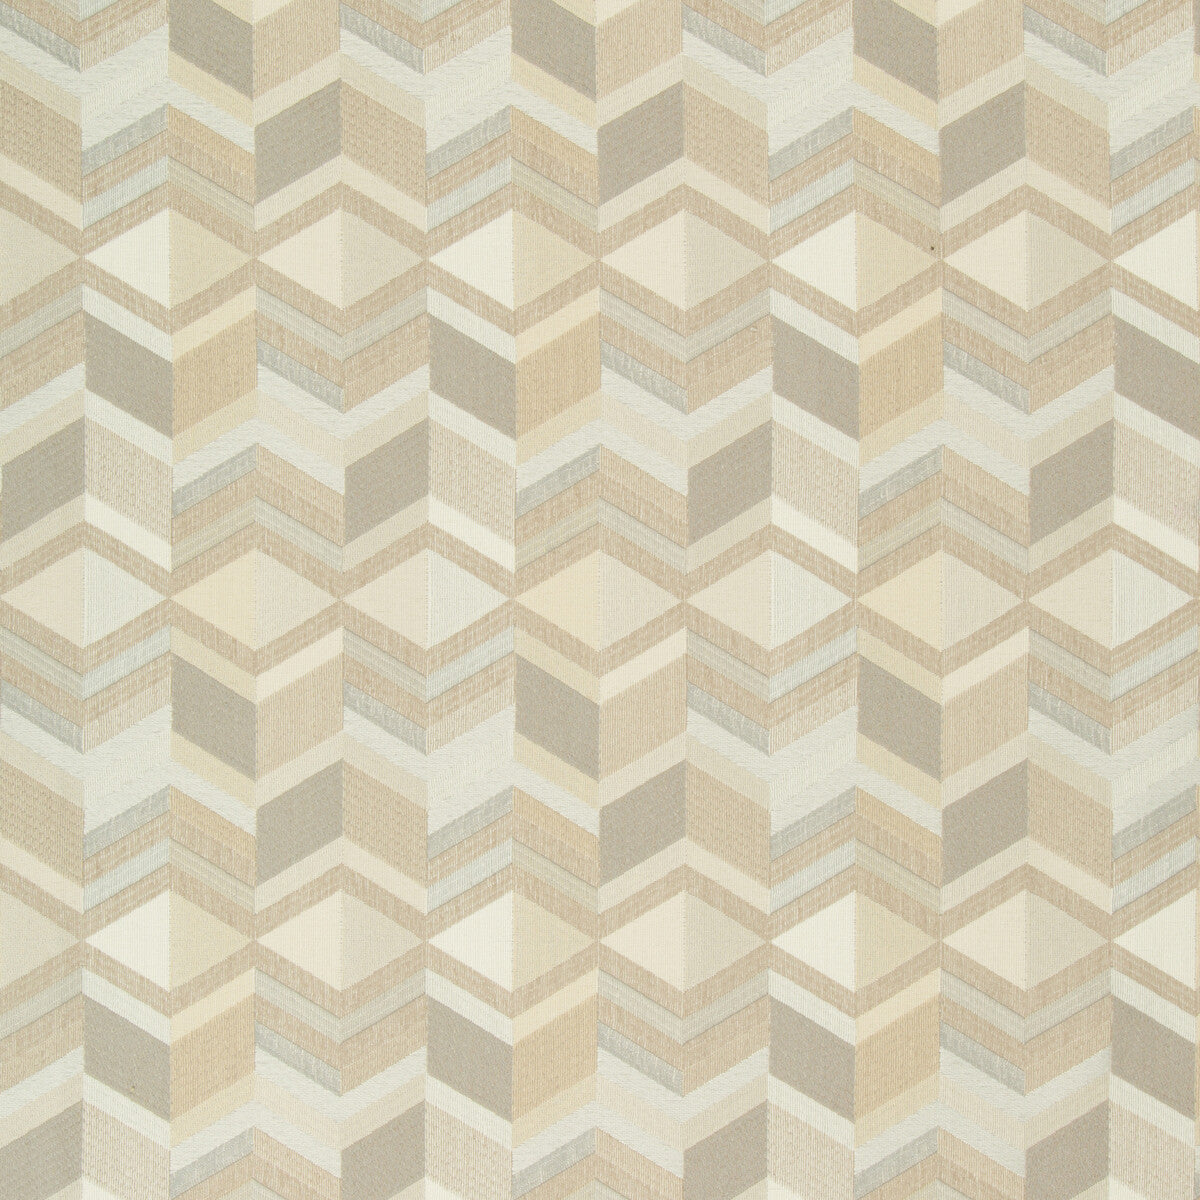 Kravet Contract fabric in 35051-1616 color - pattern 35051.1616.0 - by Kravet Contract in the Incase Crypton Gis collection